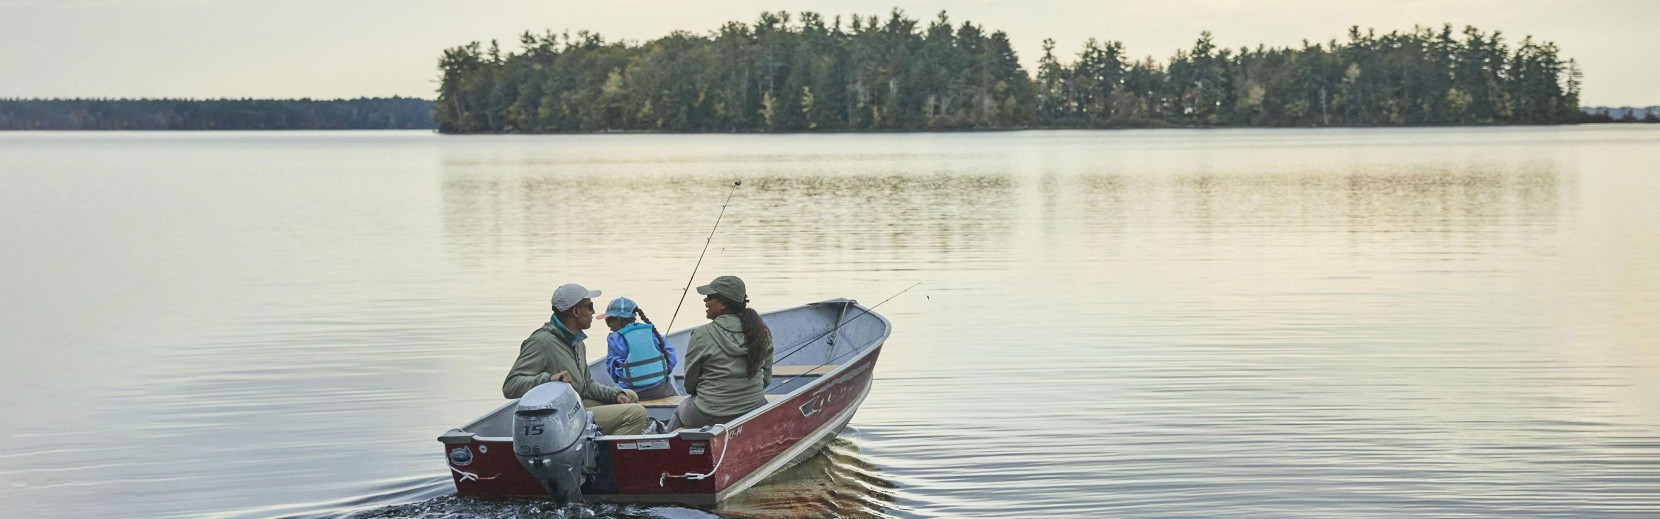 A family heading out to fish on a lake in their boat.